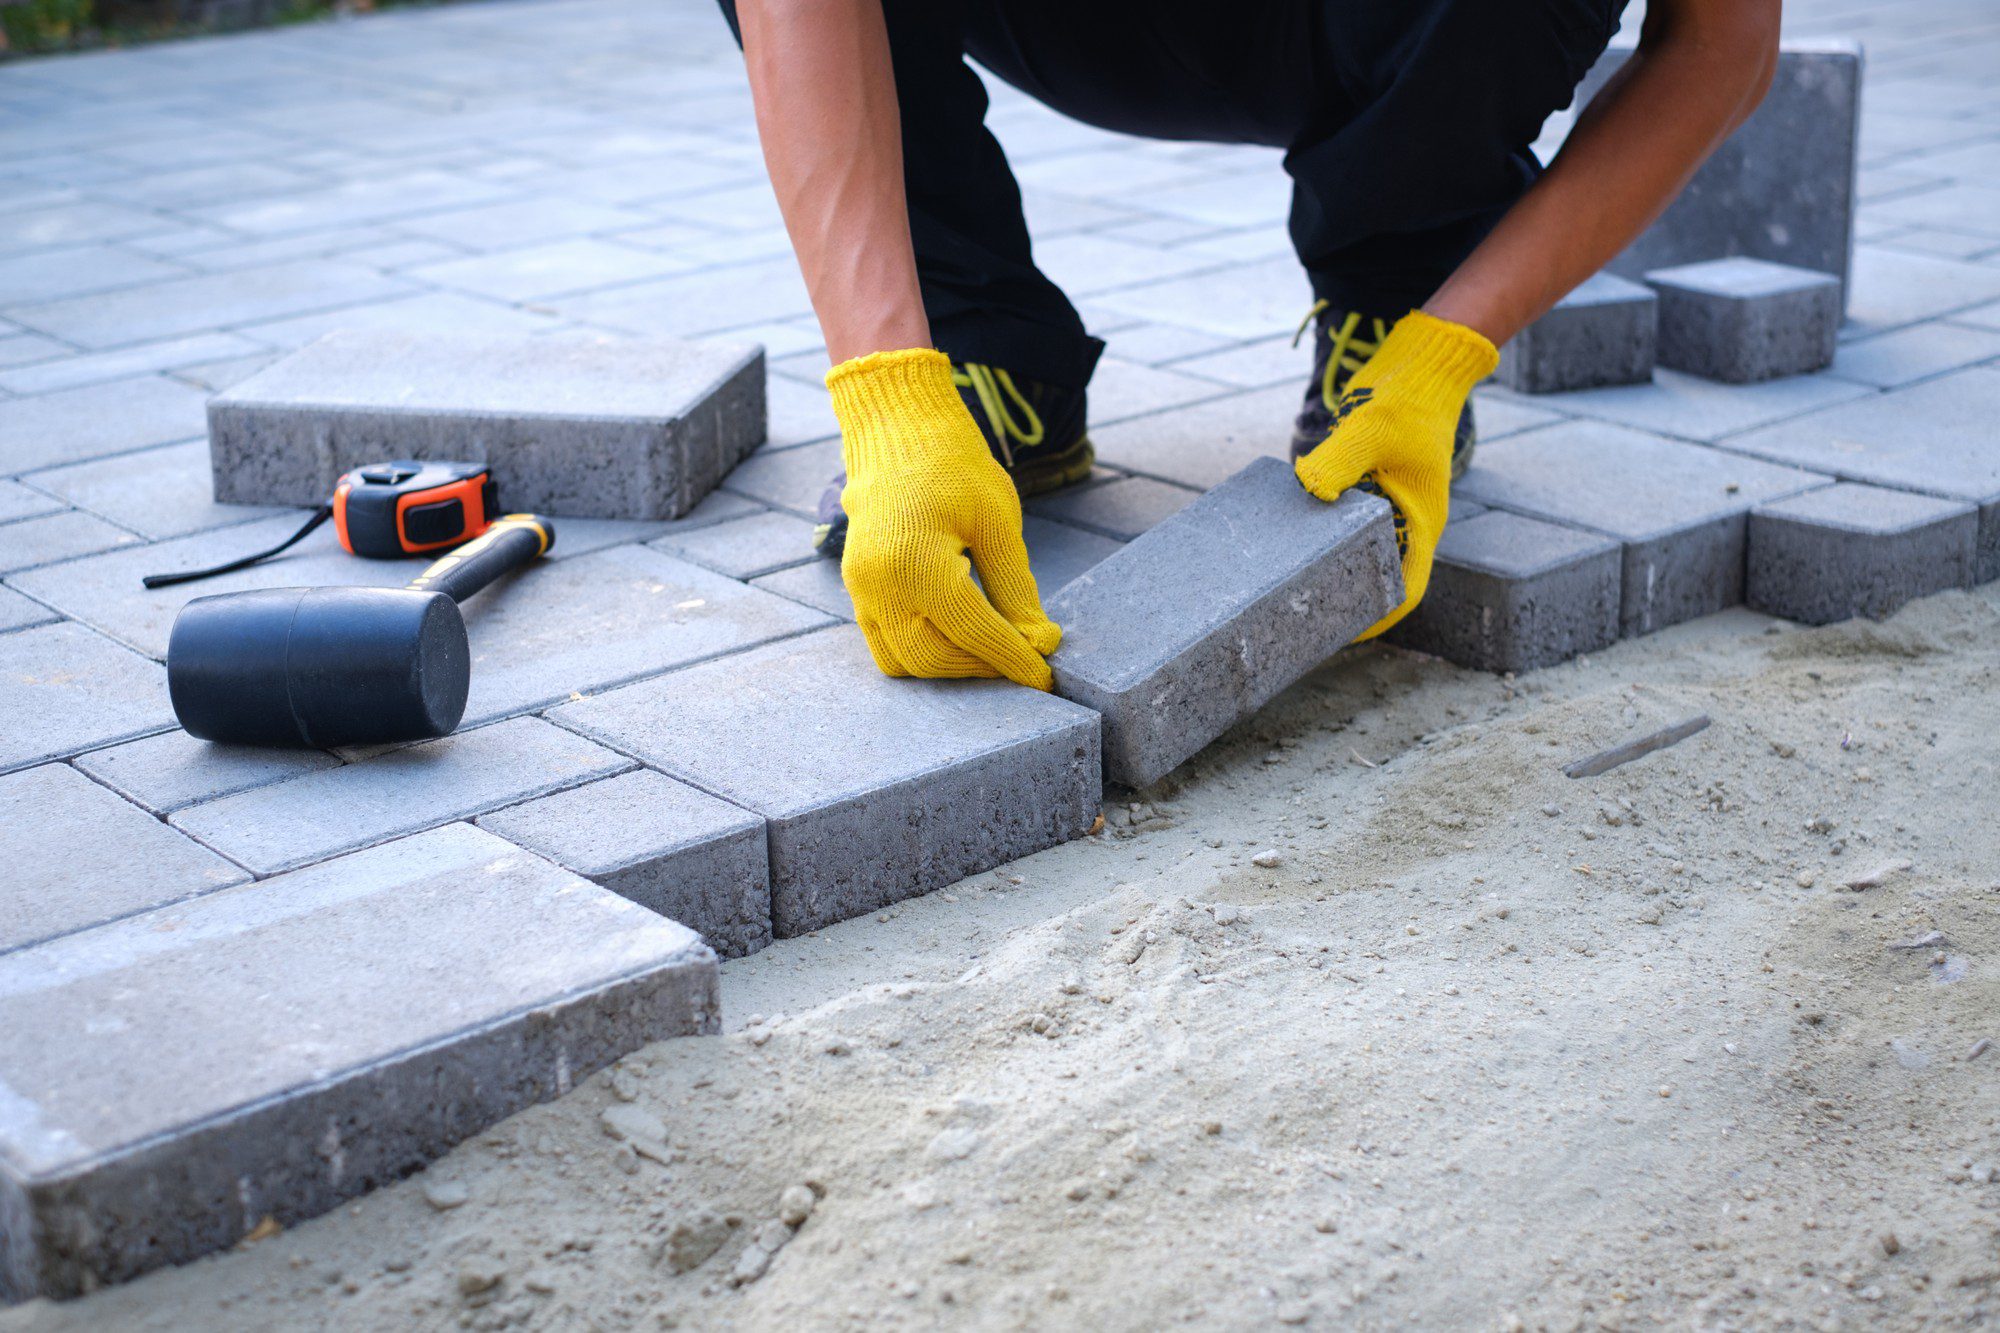 The image depicts a construction or landscaping scene where a person is laying paving stones or bricks for a walkway or patio. The person is wearing yellow work gloves and is currently placing a rectangular gray paving stone into position. On the ground, to the left of the person, there is a black rubber mallet and a measuring tape, tools commonly used in such work for proper placement and alignment of the stones. The surface underneath the paving stones appears to be a layer of sand, which is a typical base material for this kind of construction to ensure a level and stable foundation for the pavers. The surrounding stones have already been laid in a neat pattern.